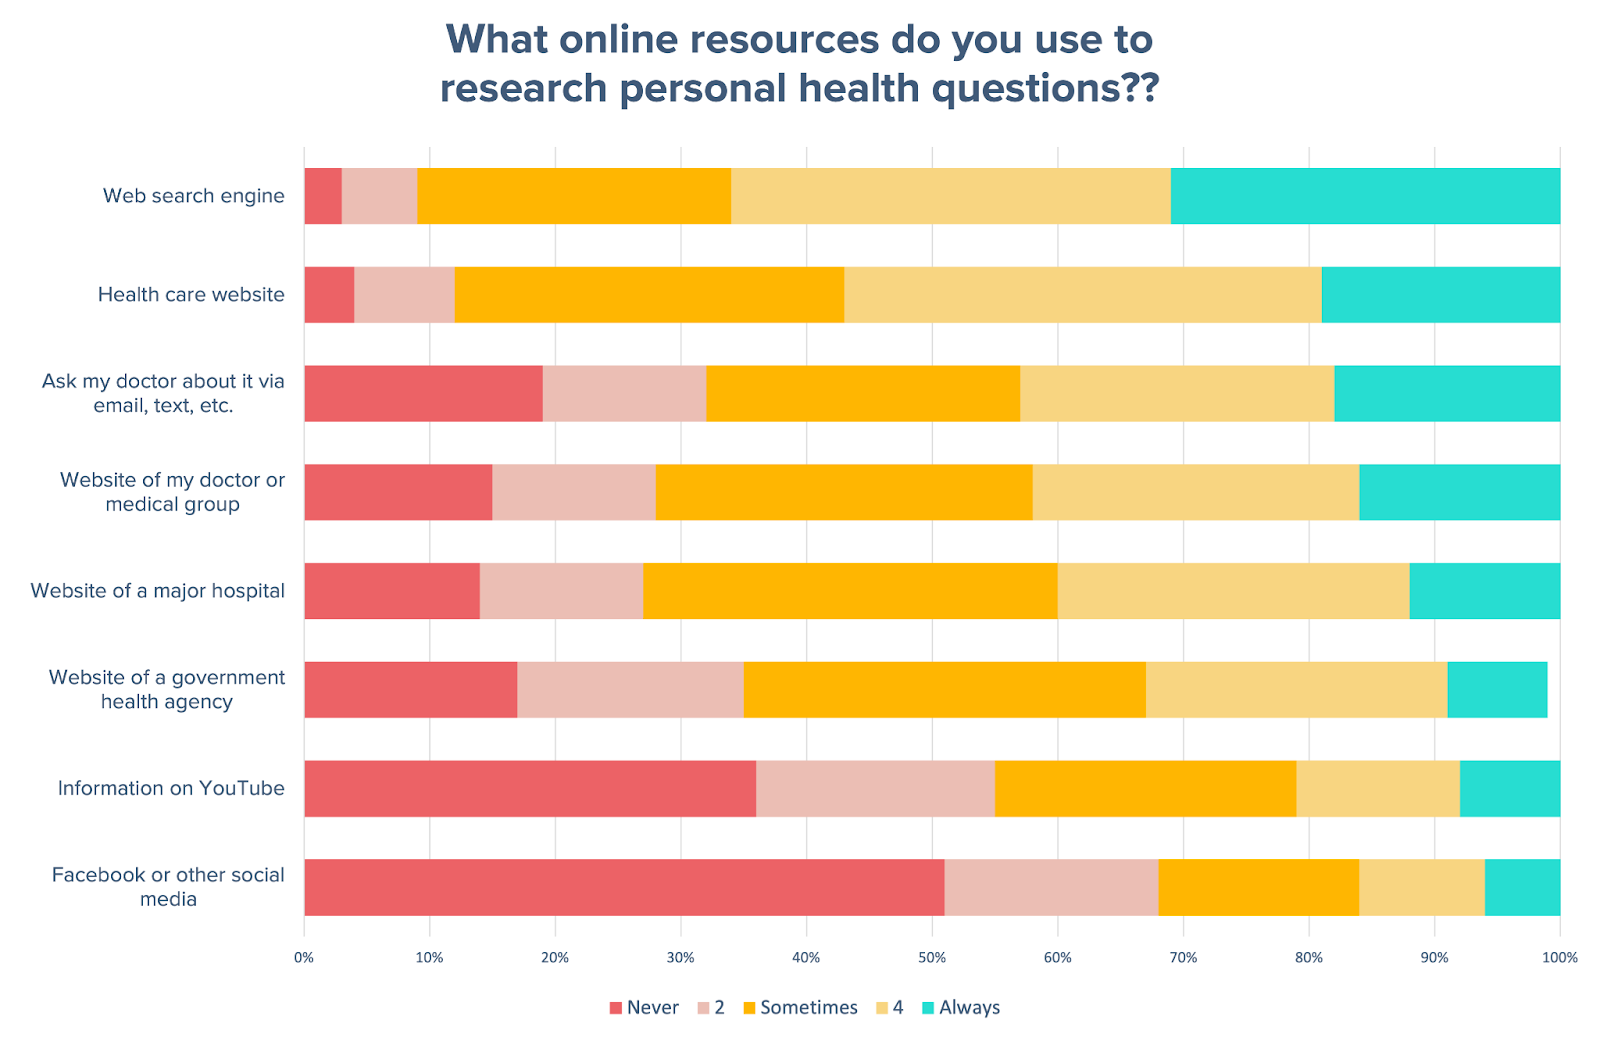 A chart shows that web search is most often used online source for health information, followed by a health care website, email or text to a doctor, and the website of their doctor. Least commonly used were social media sites and YouTube.